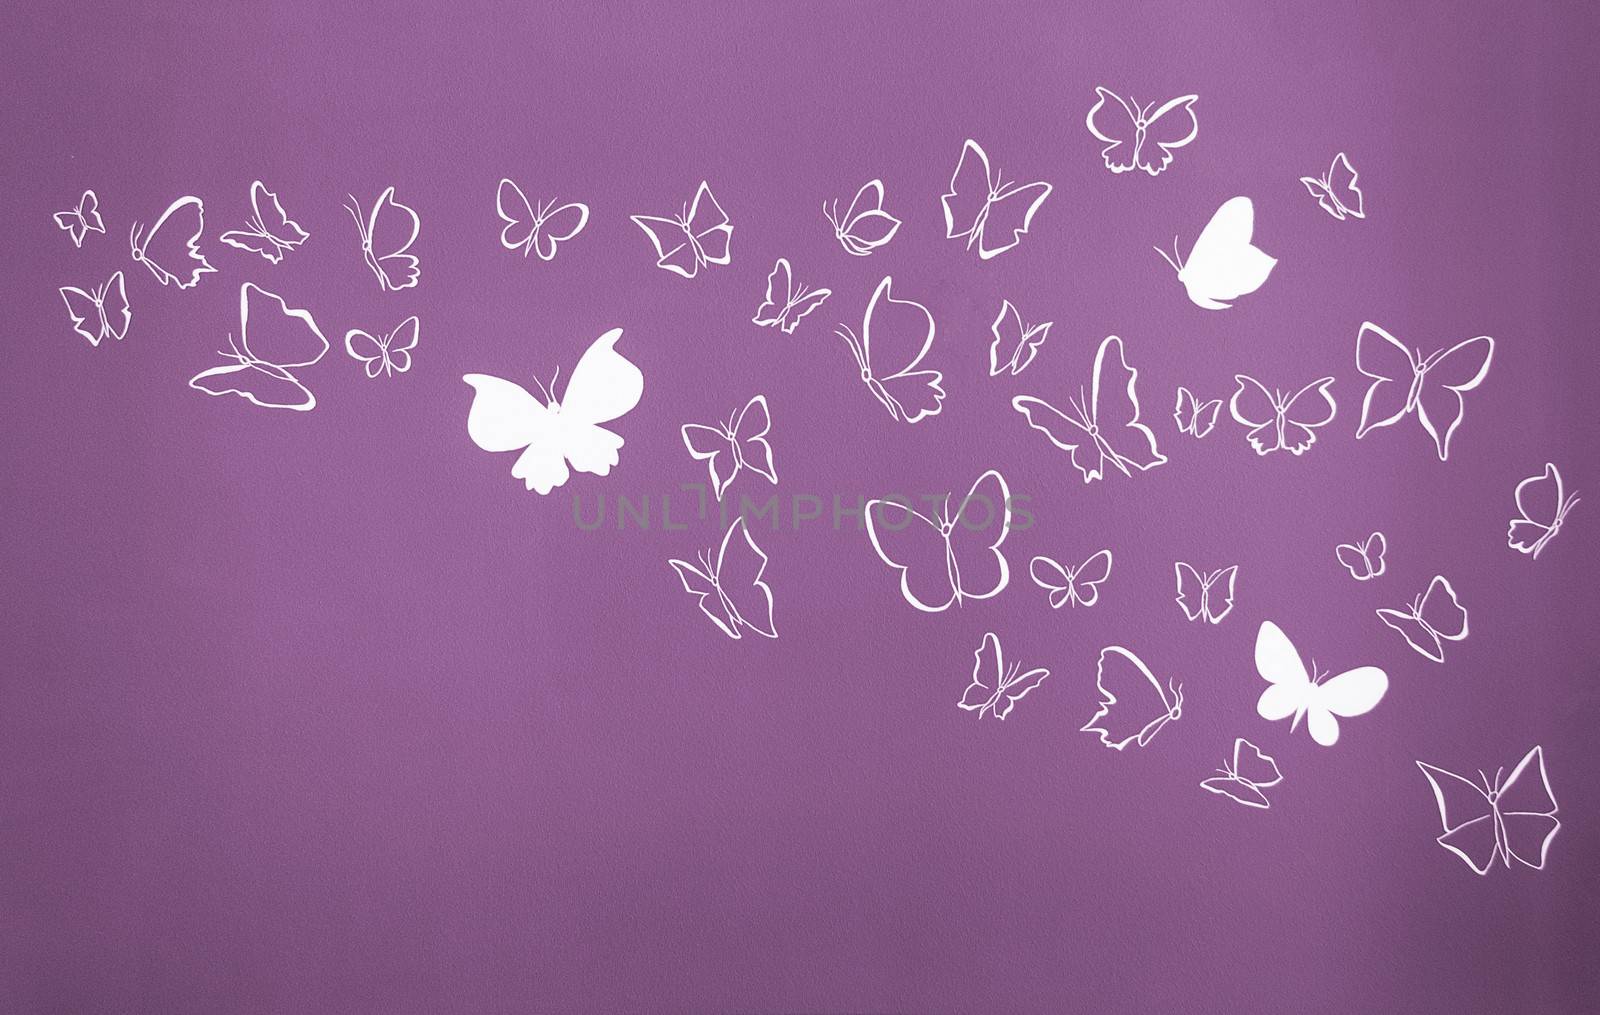 Group of white silhouettes butterflies flying over a violet background